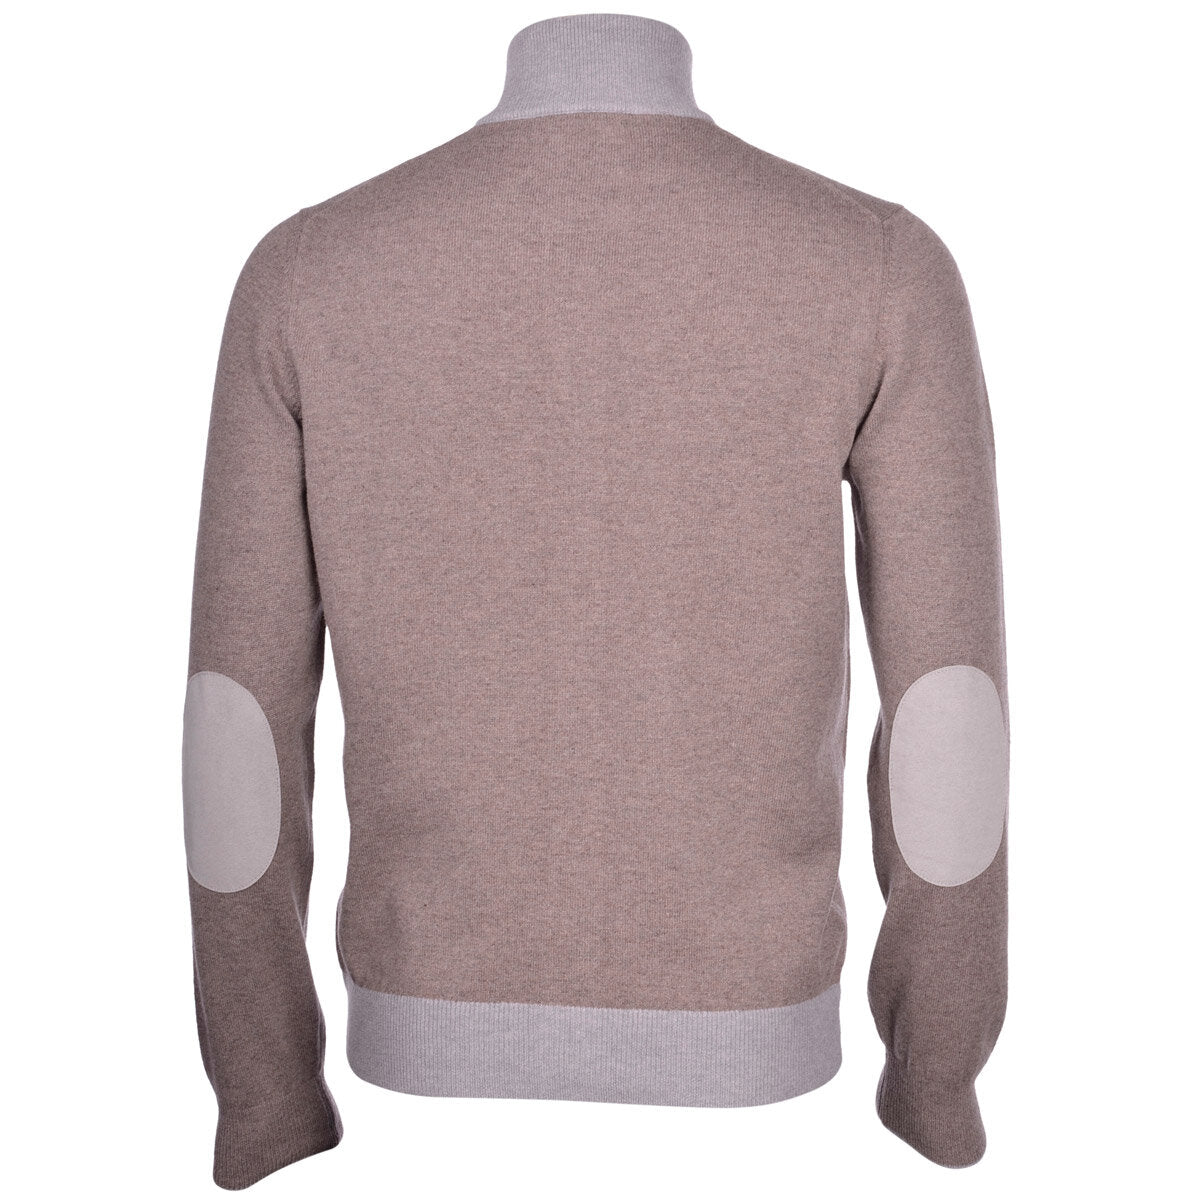 Gran Sasso Full-Zip Sweater with Contrast and Elbow Patches in Oatmeal